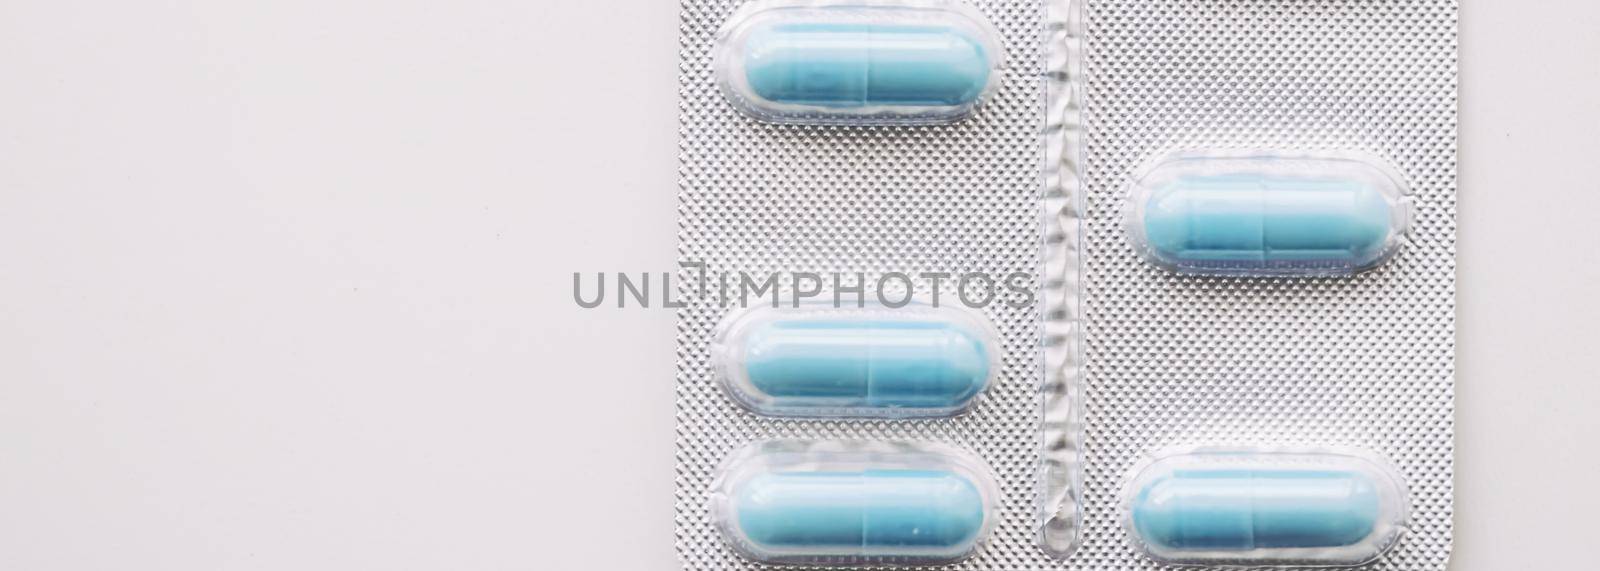 Blue pills and capsules as nutrition supplement, wellness and health care by Anneleven